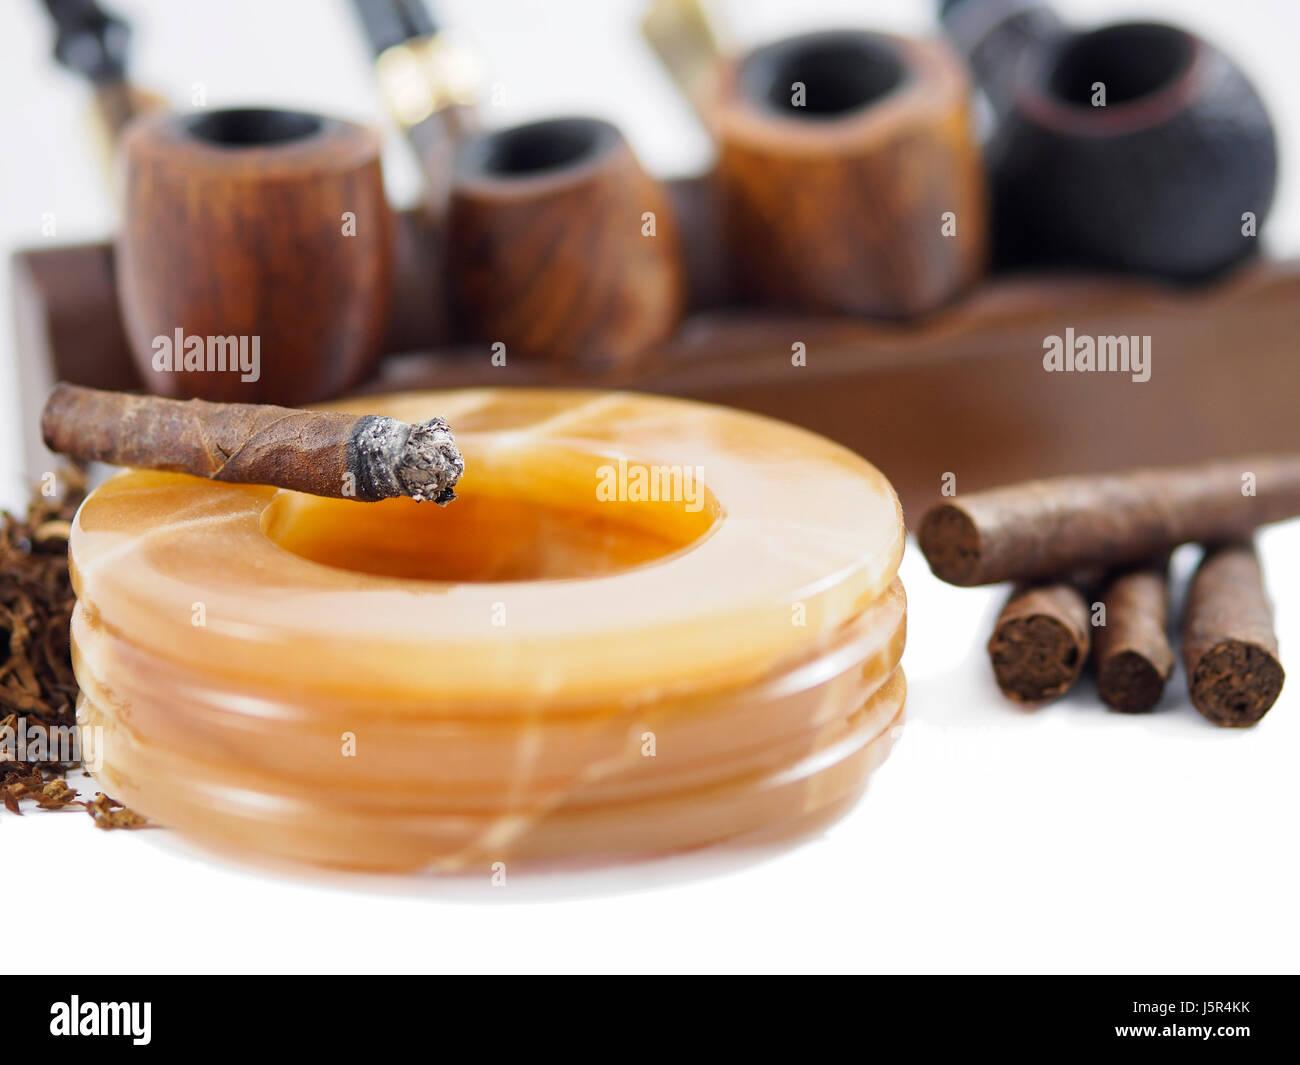 Burning Toscano cigar on an alabaster ashtray. On the background, four Italian pipes. Stock Photo